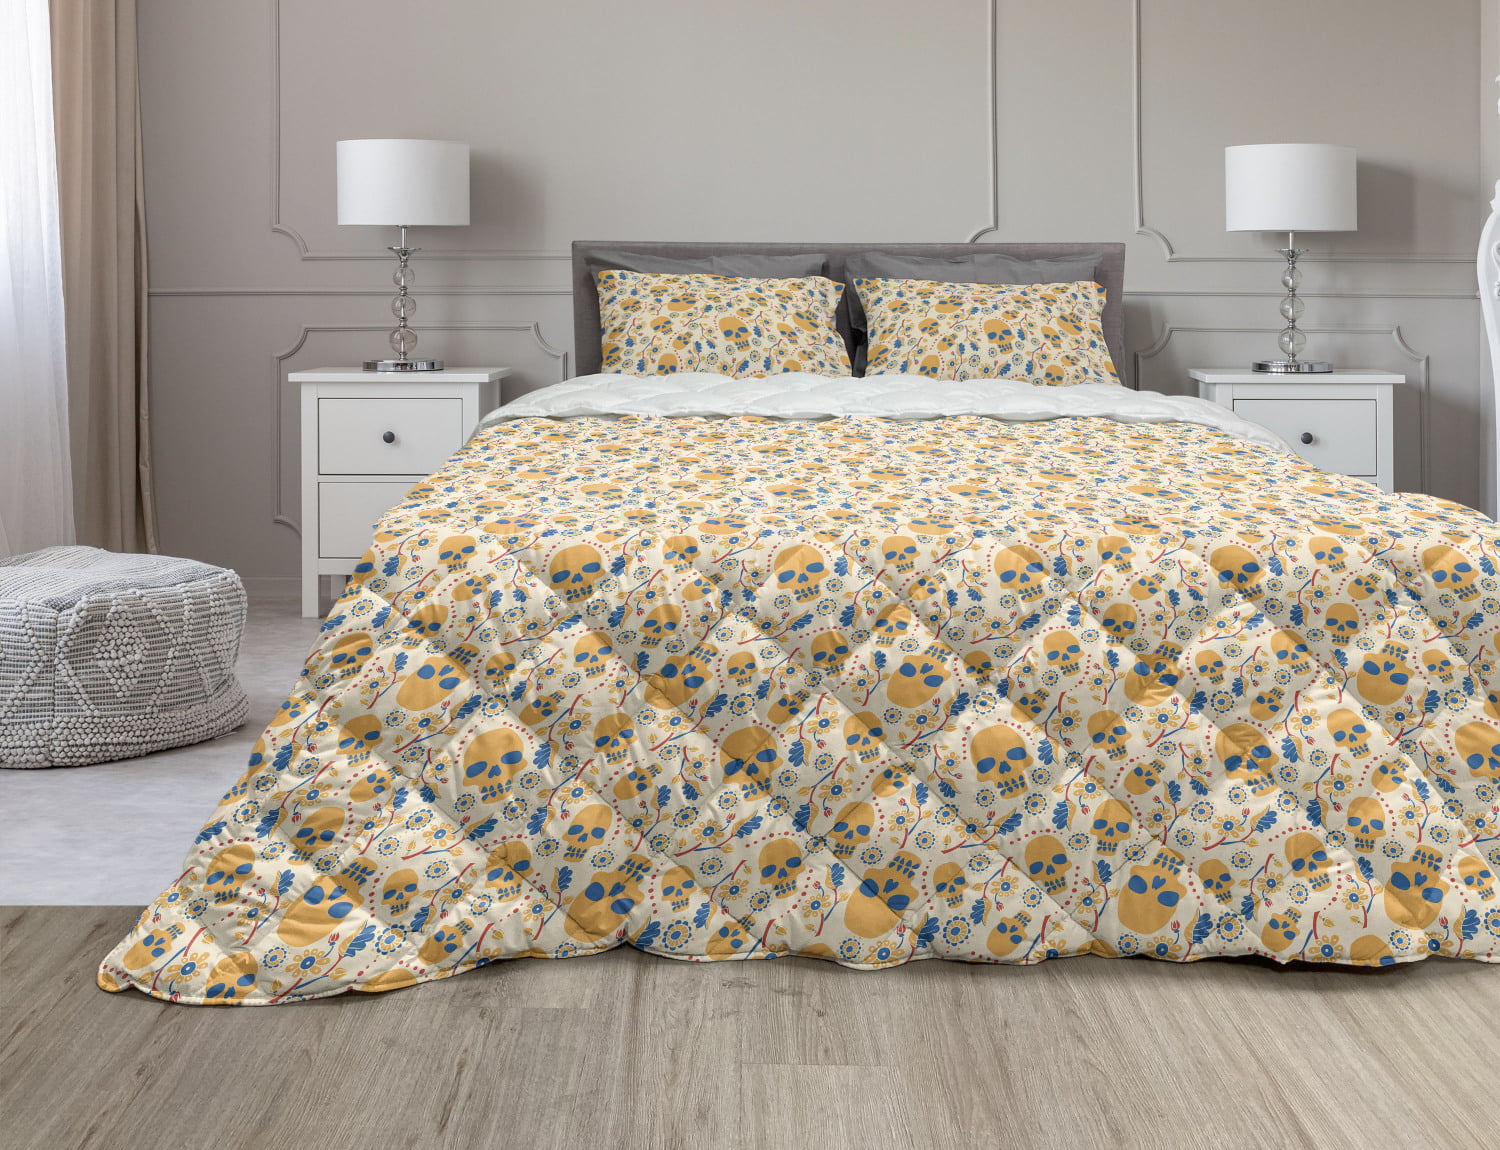 Floral Printed King Family Friendly Comforter & Sham Set Yellow Blue Threshold for sale online 